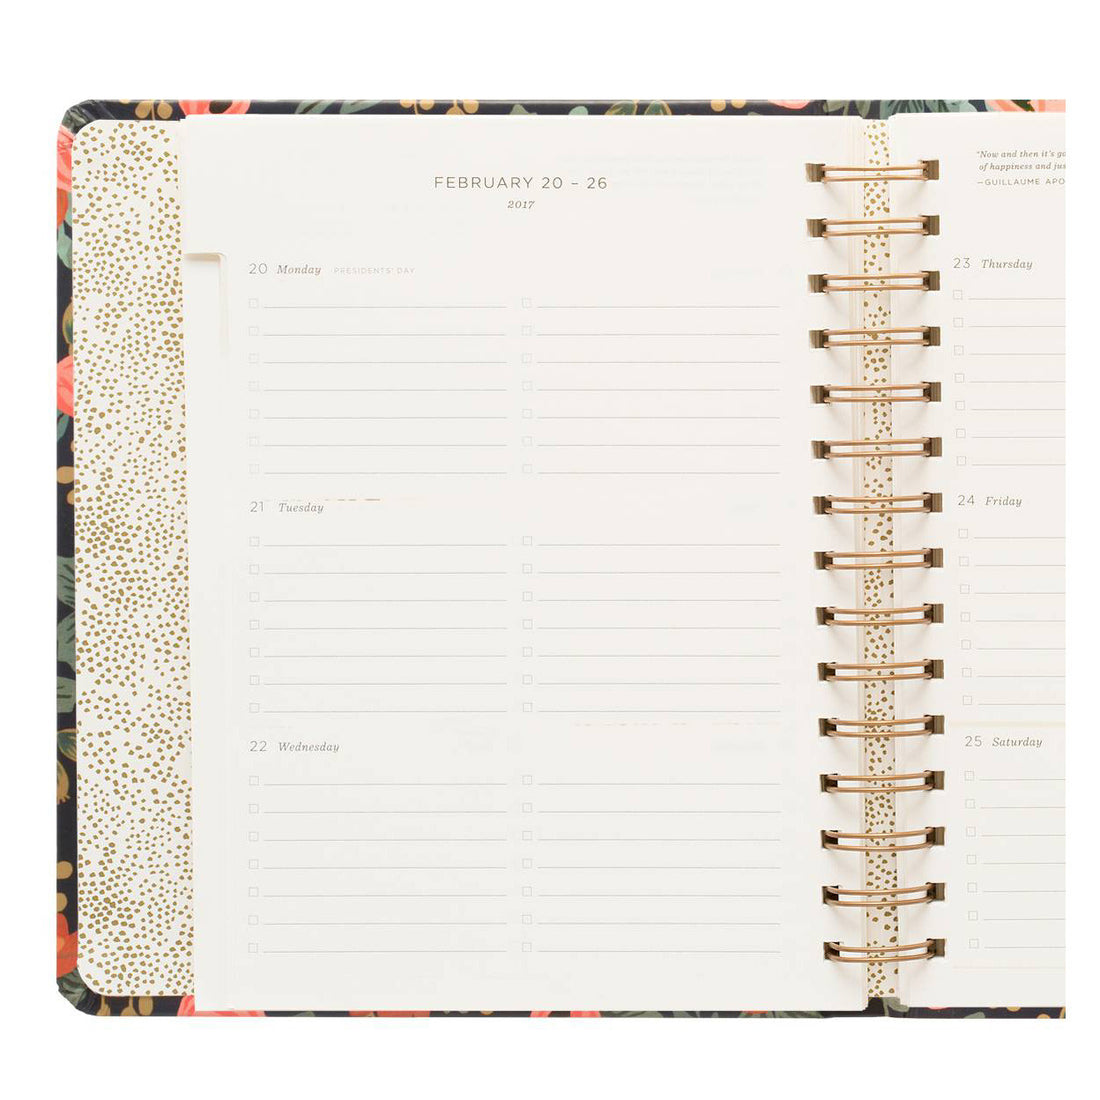 rifle-paper-co-2016-birch-floral-planner-10